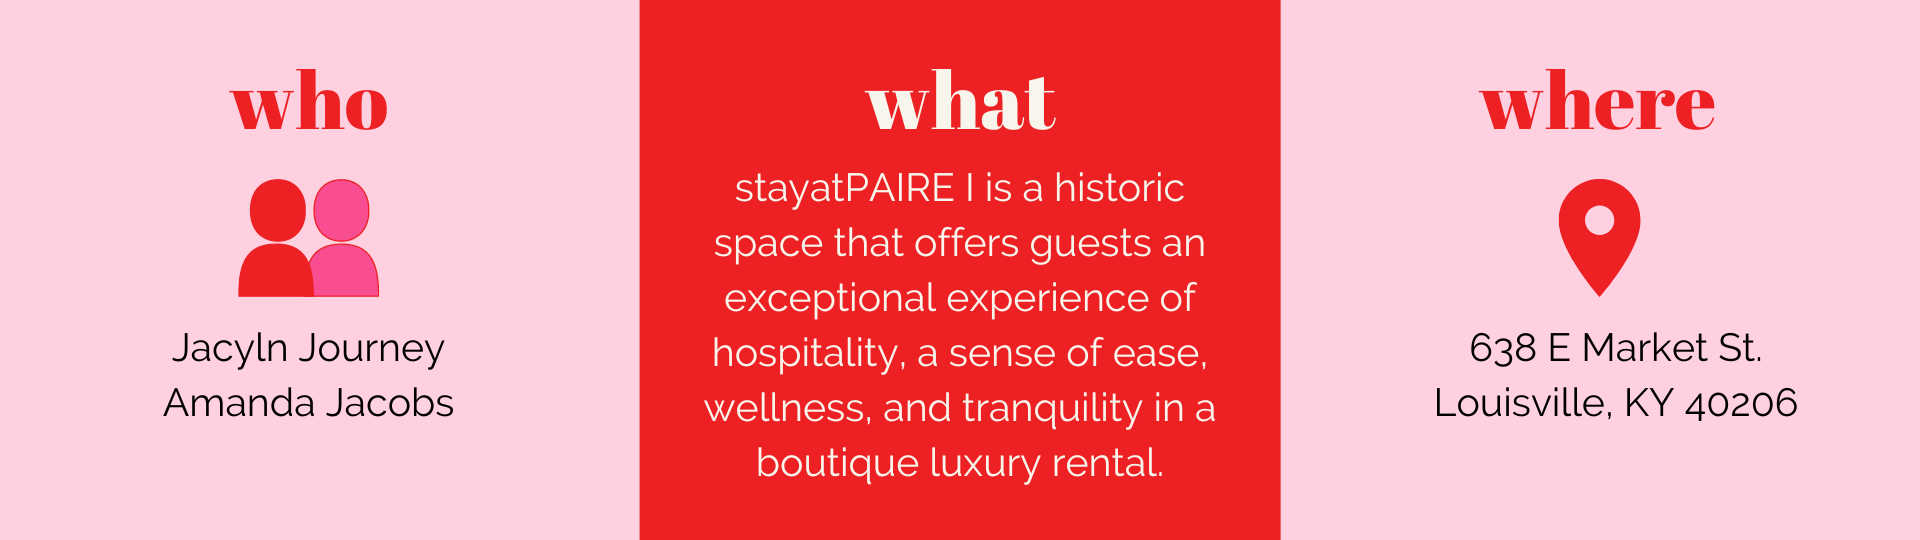 Text graphic that showcases the owners' names of stayatPAIRE II, Amanda Jacobs and Jaclyn Journey, a short bio about the rental, and the address/location of the rental space.